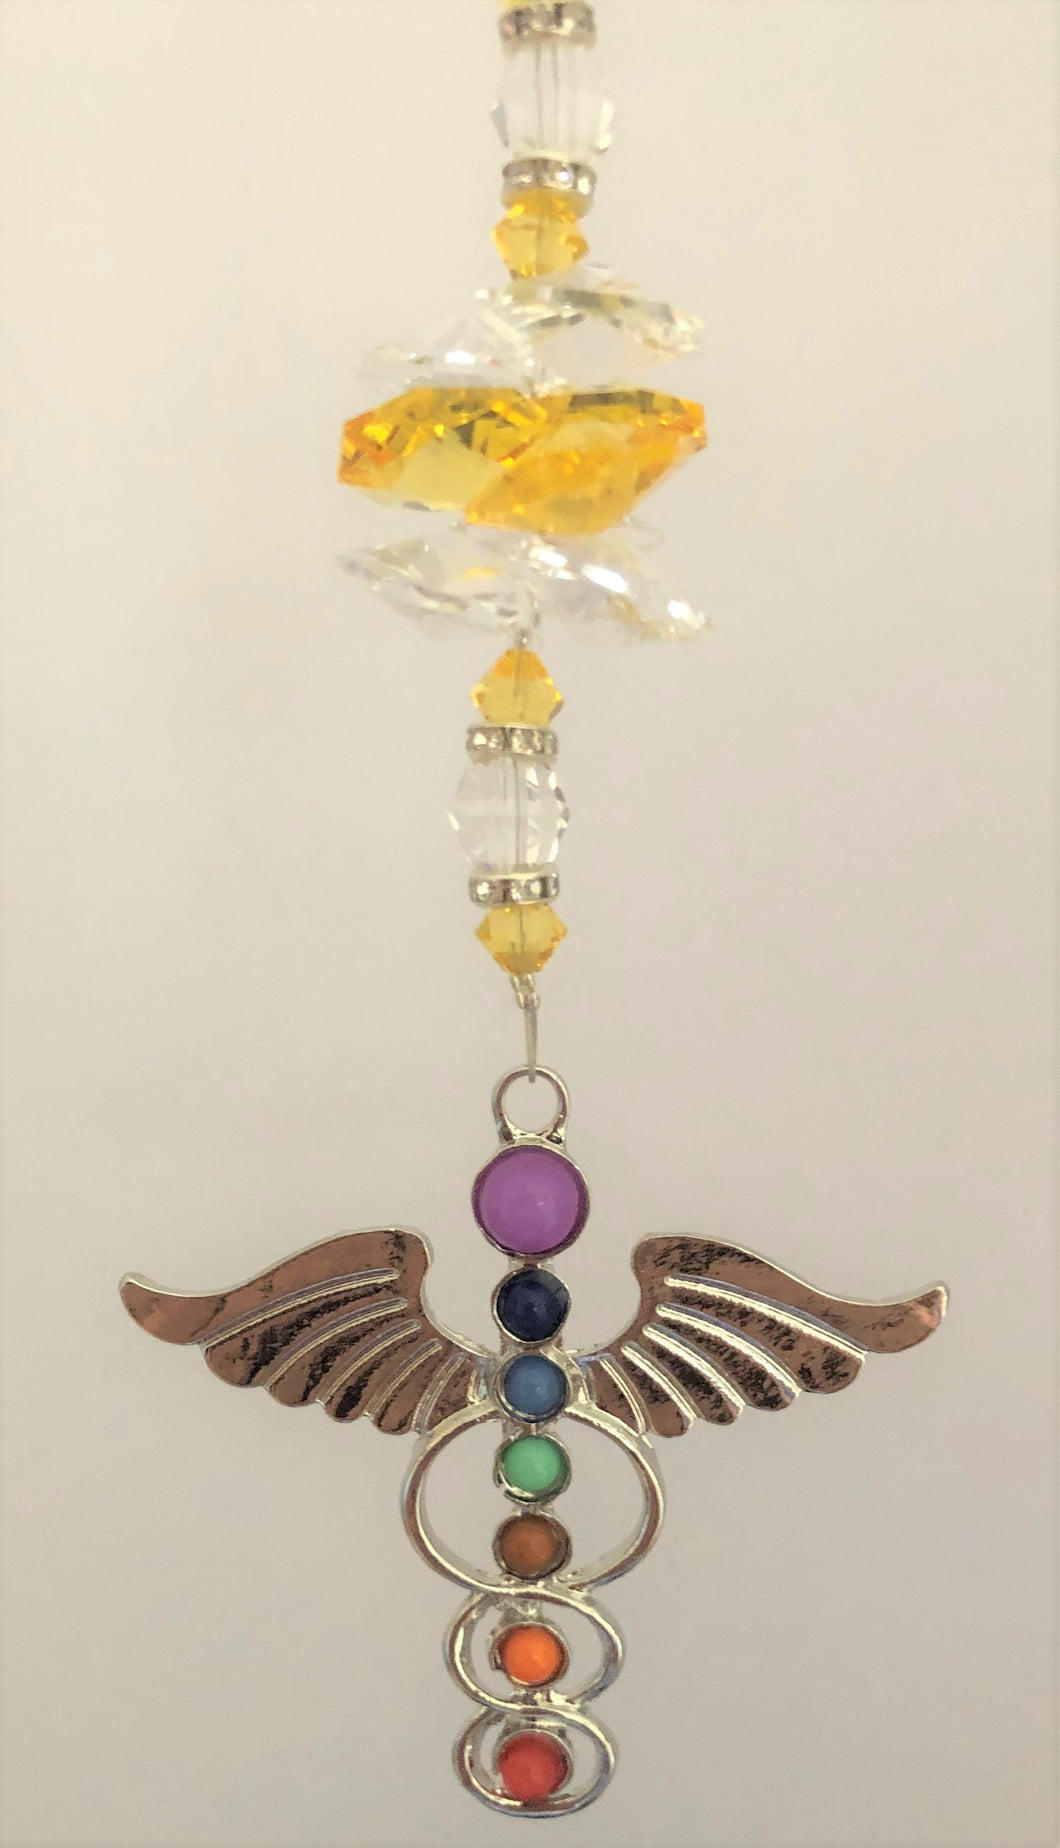 This beautiful Chakra Angel Wings suncatcher which is decorated with crystals and Citrine